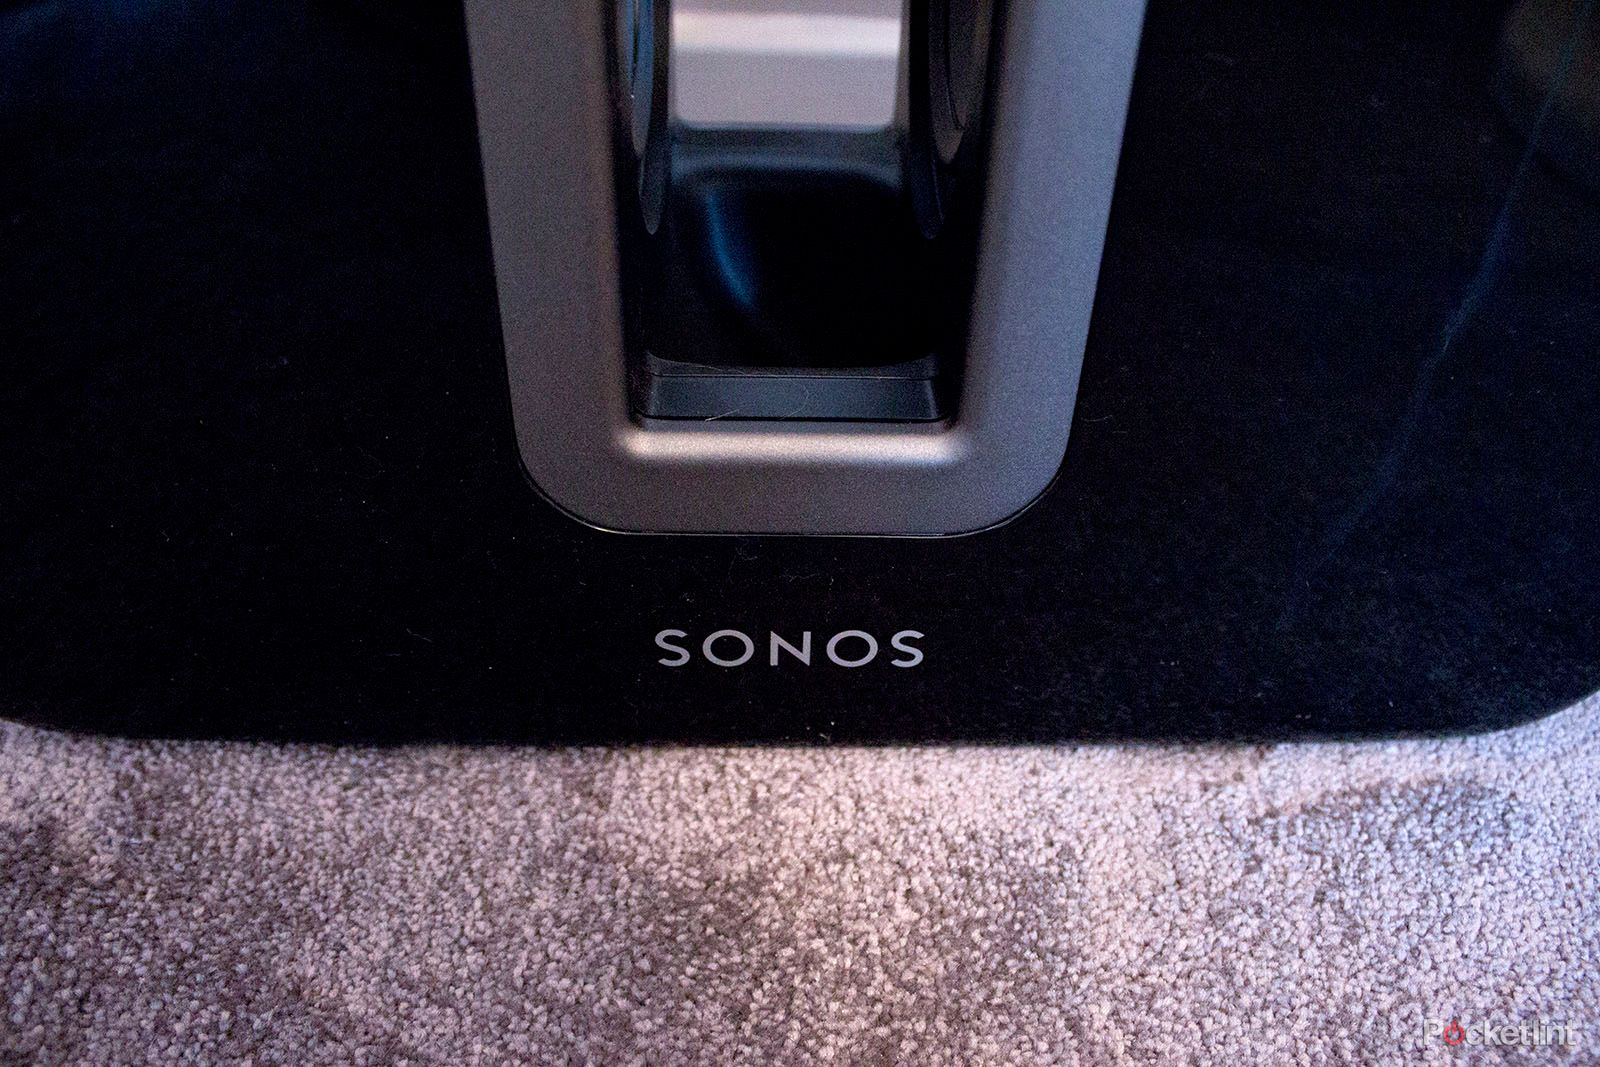 Sonos Sub Review All About That Bass image 5